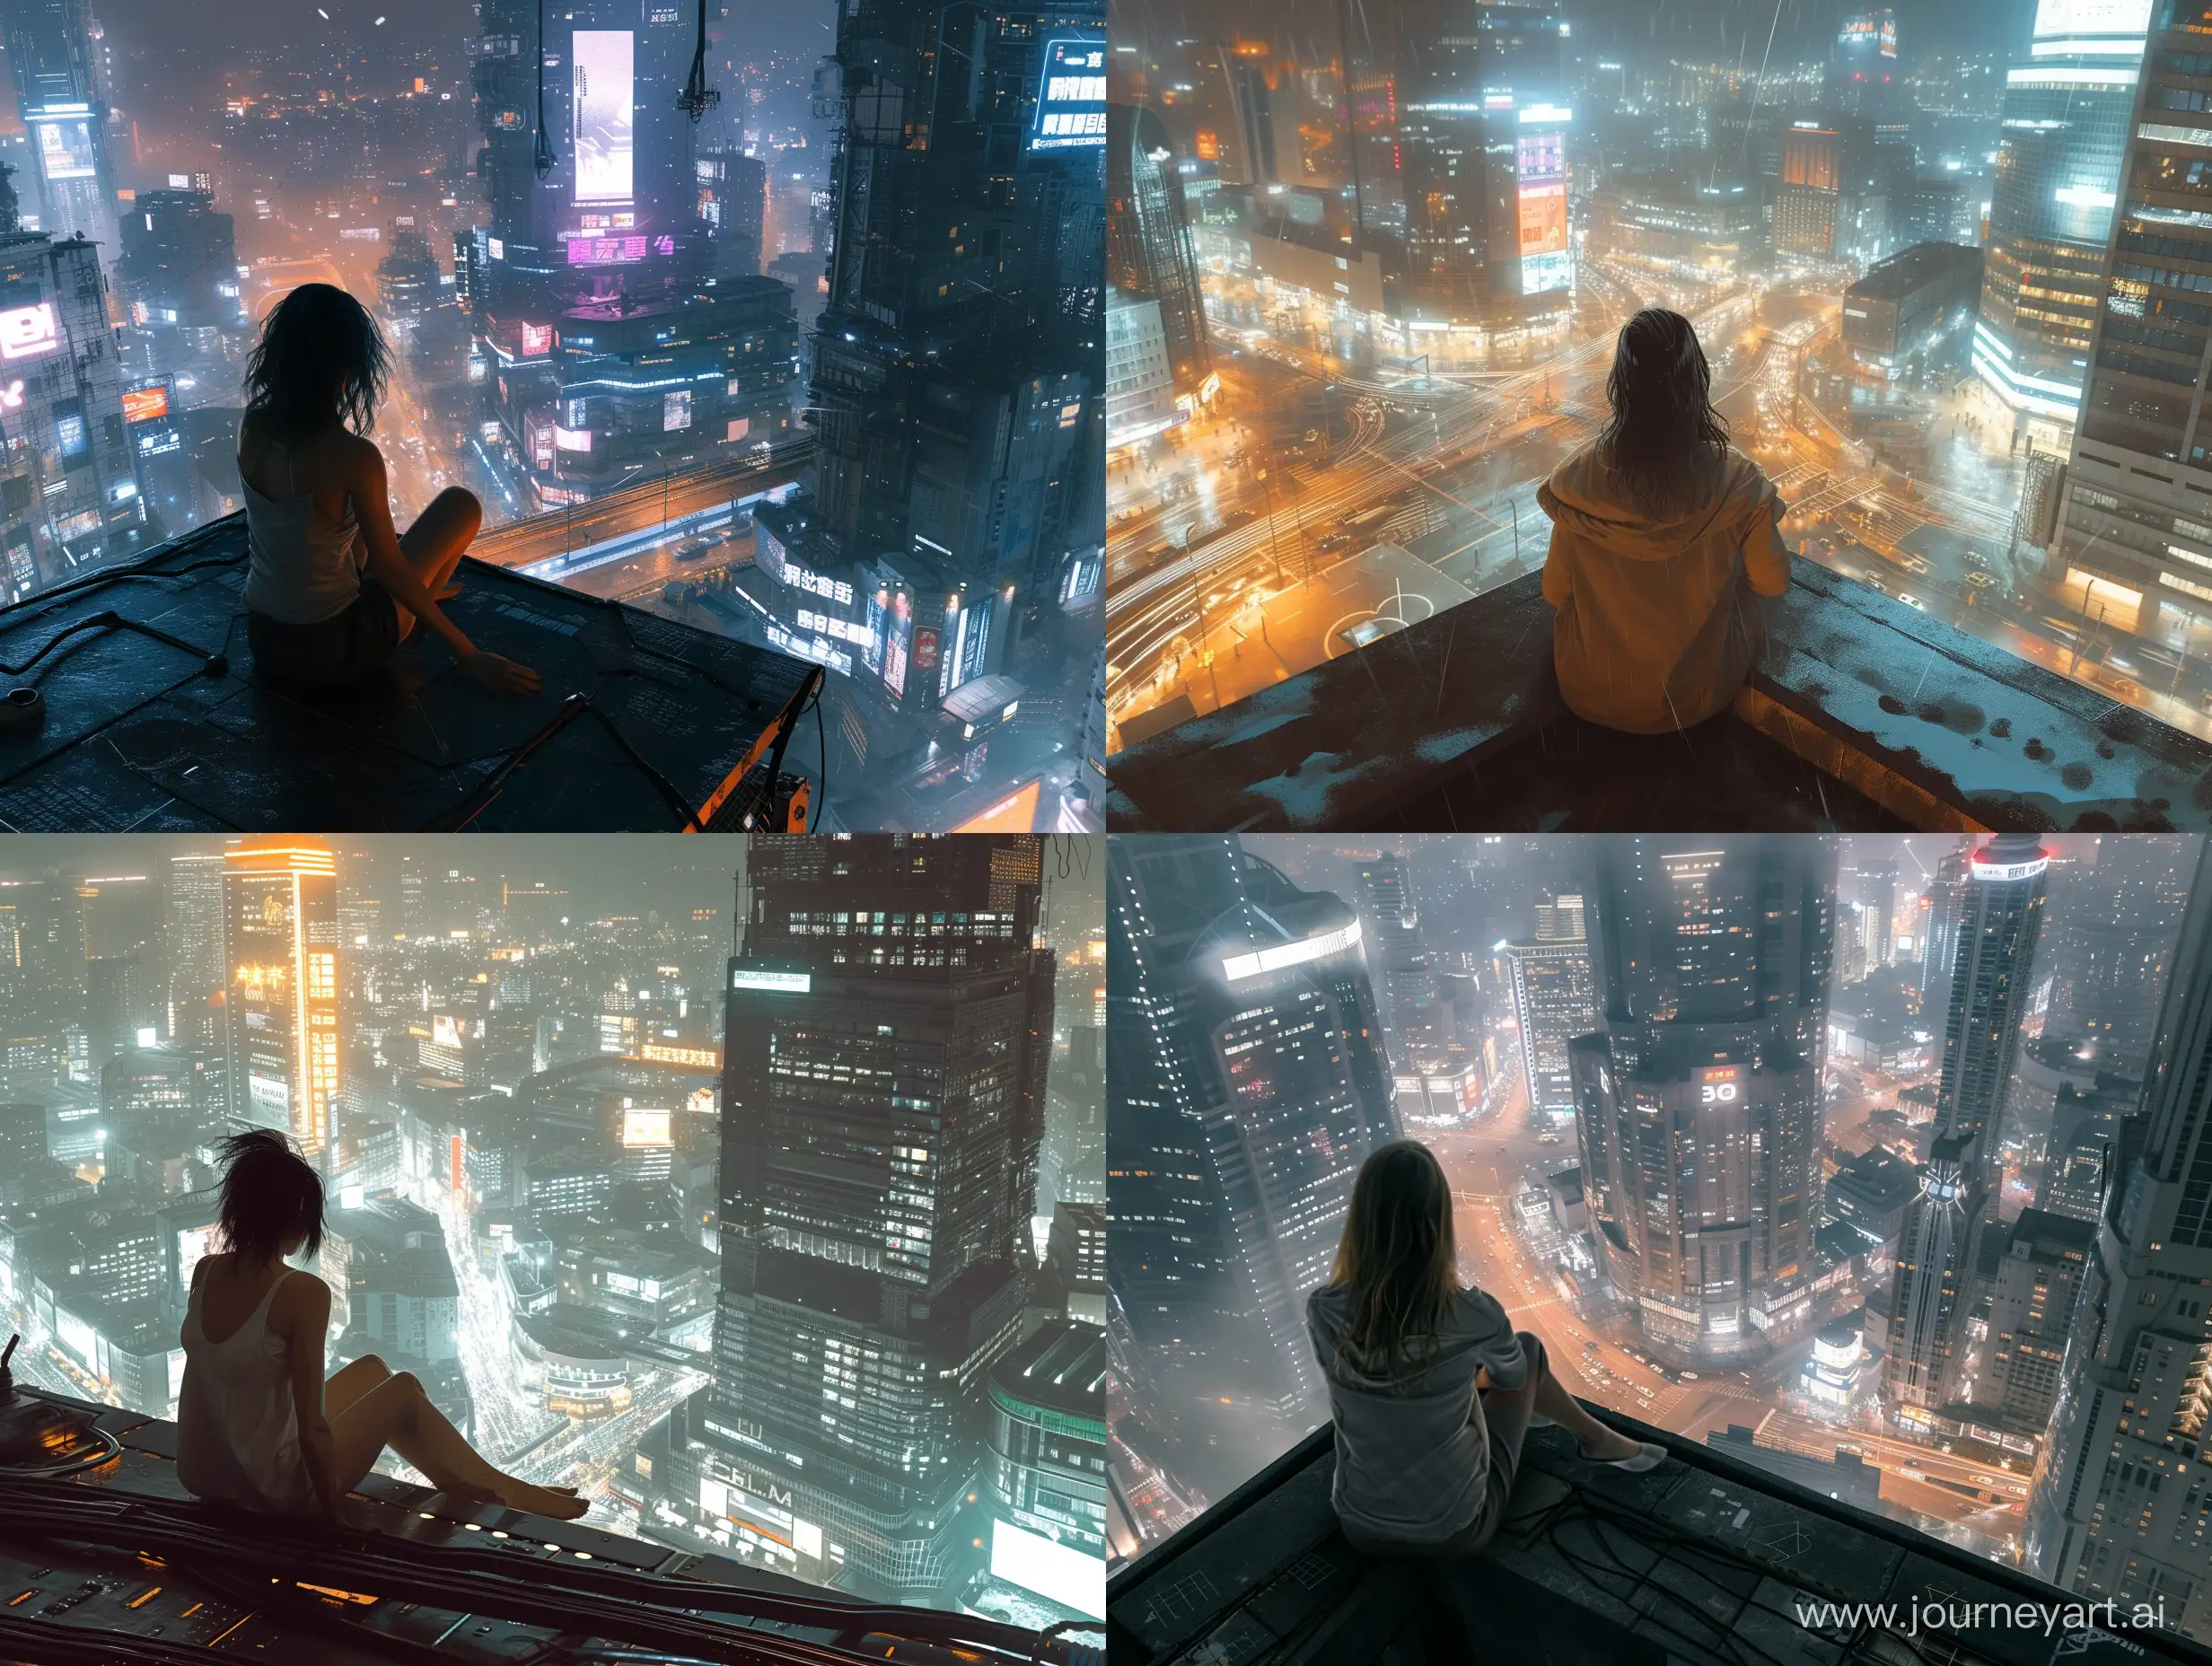 A picture capturing the viewpoint of a woman seated on the rooftop of a building while looking at the city, with natural night time, in a bustling futuristic city environment. The image shows a full view of the city and has a raw and relaxing style, with pleasant weather.
